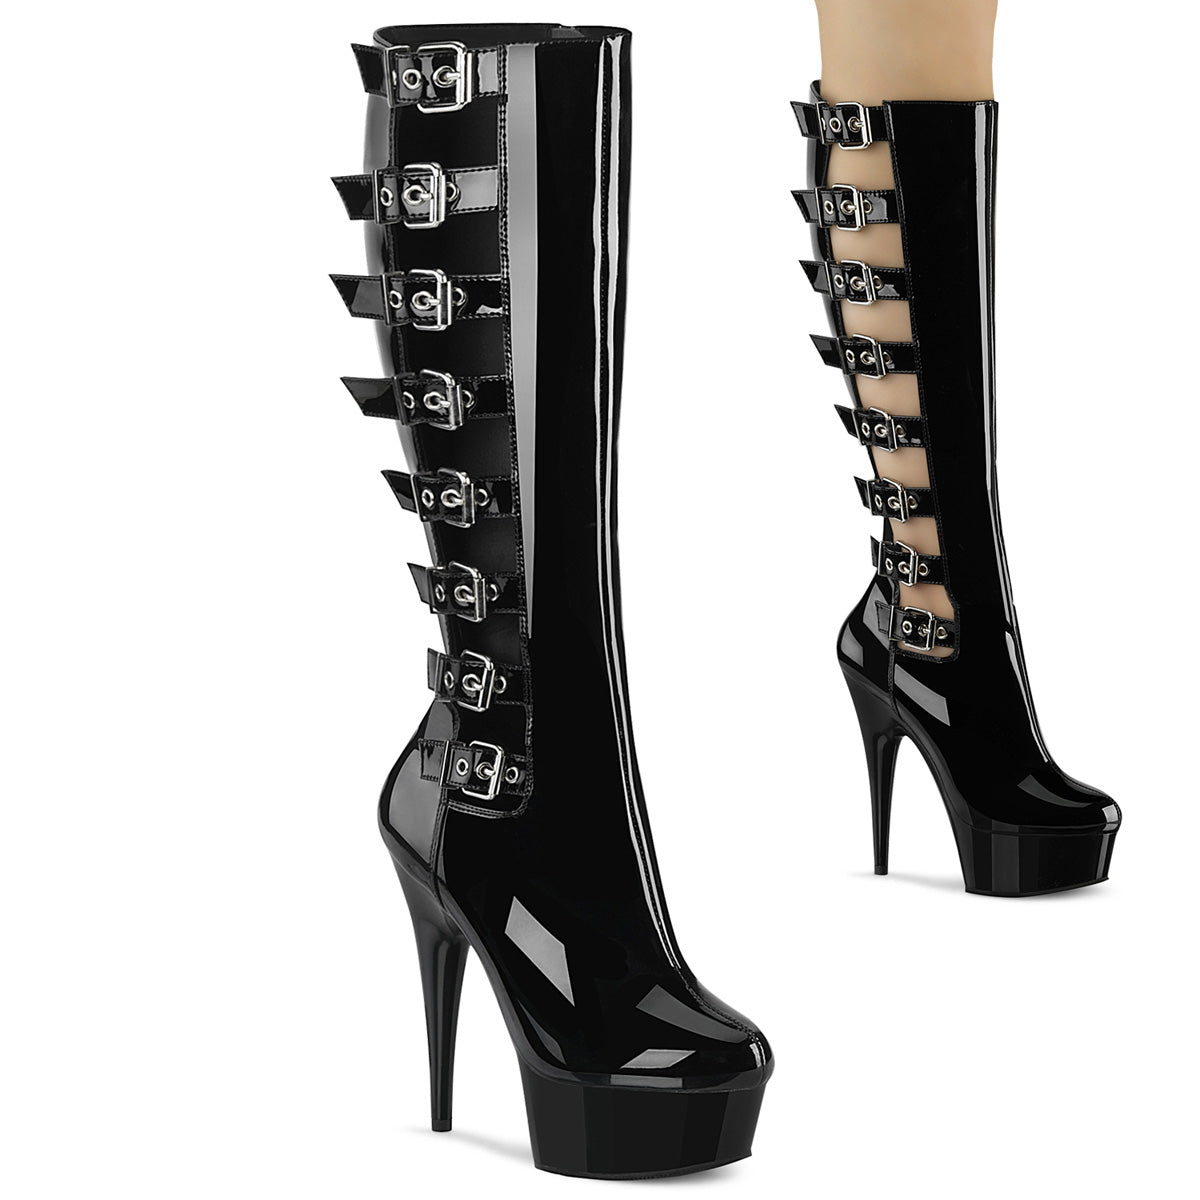 DELIGHT-2047 Black Knee High Boots